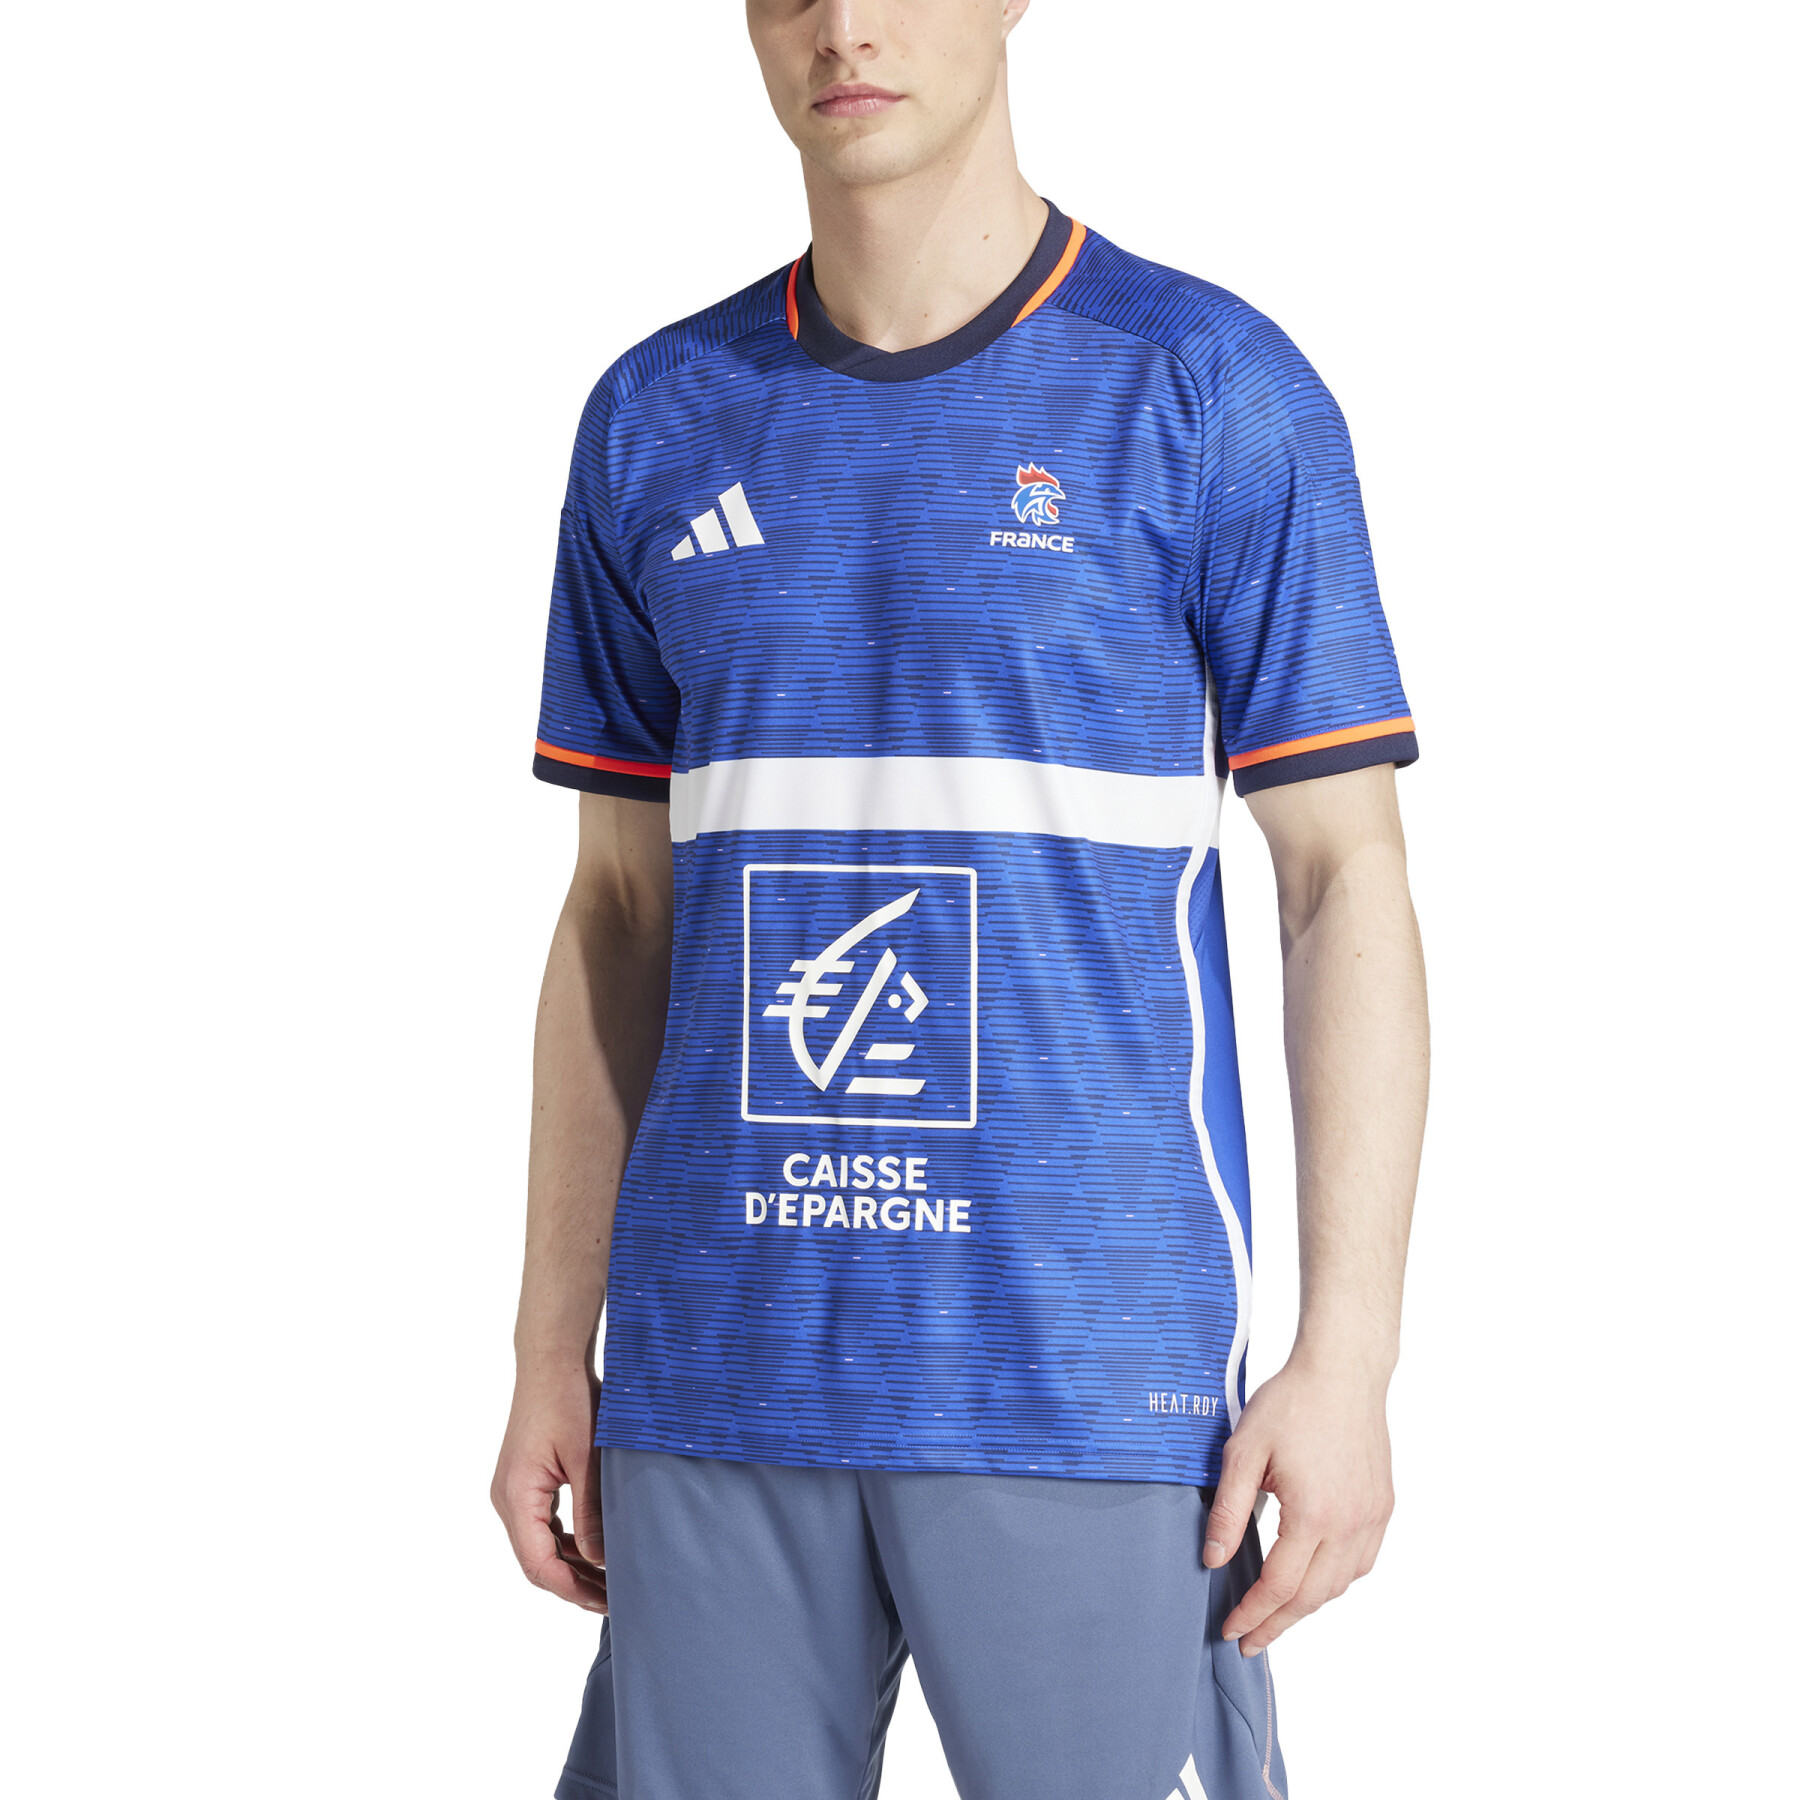 Official team home jersey France JO 2024/25